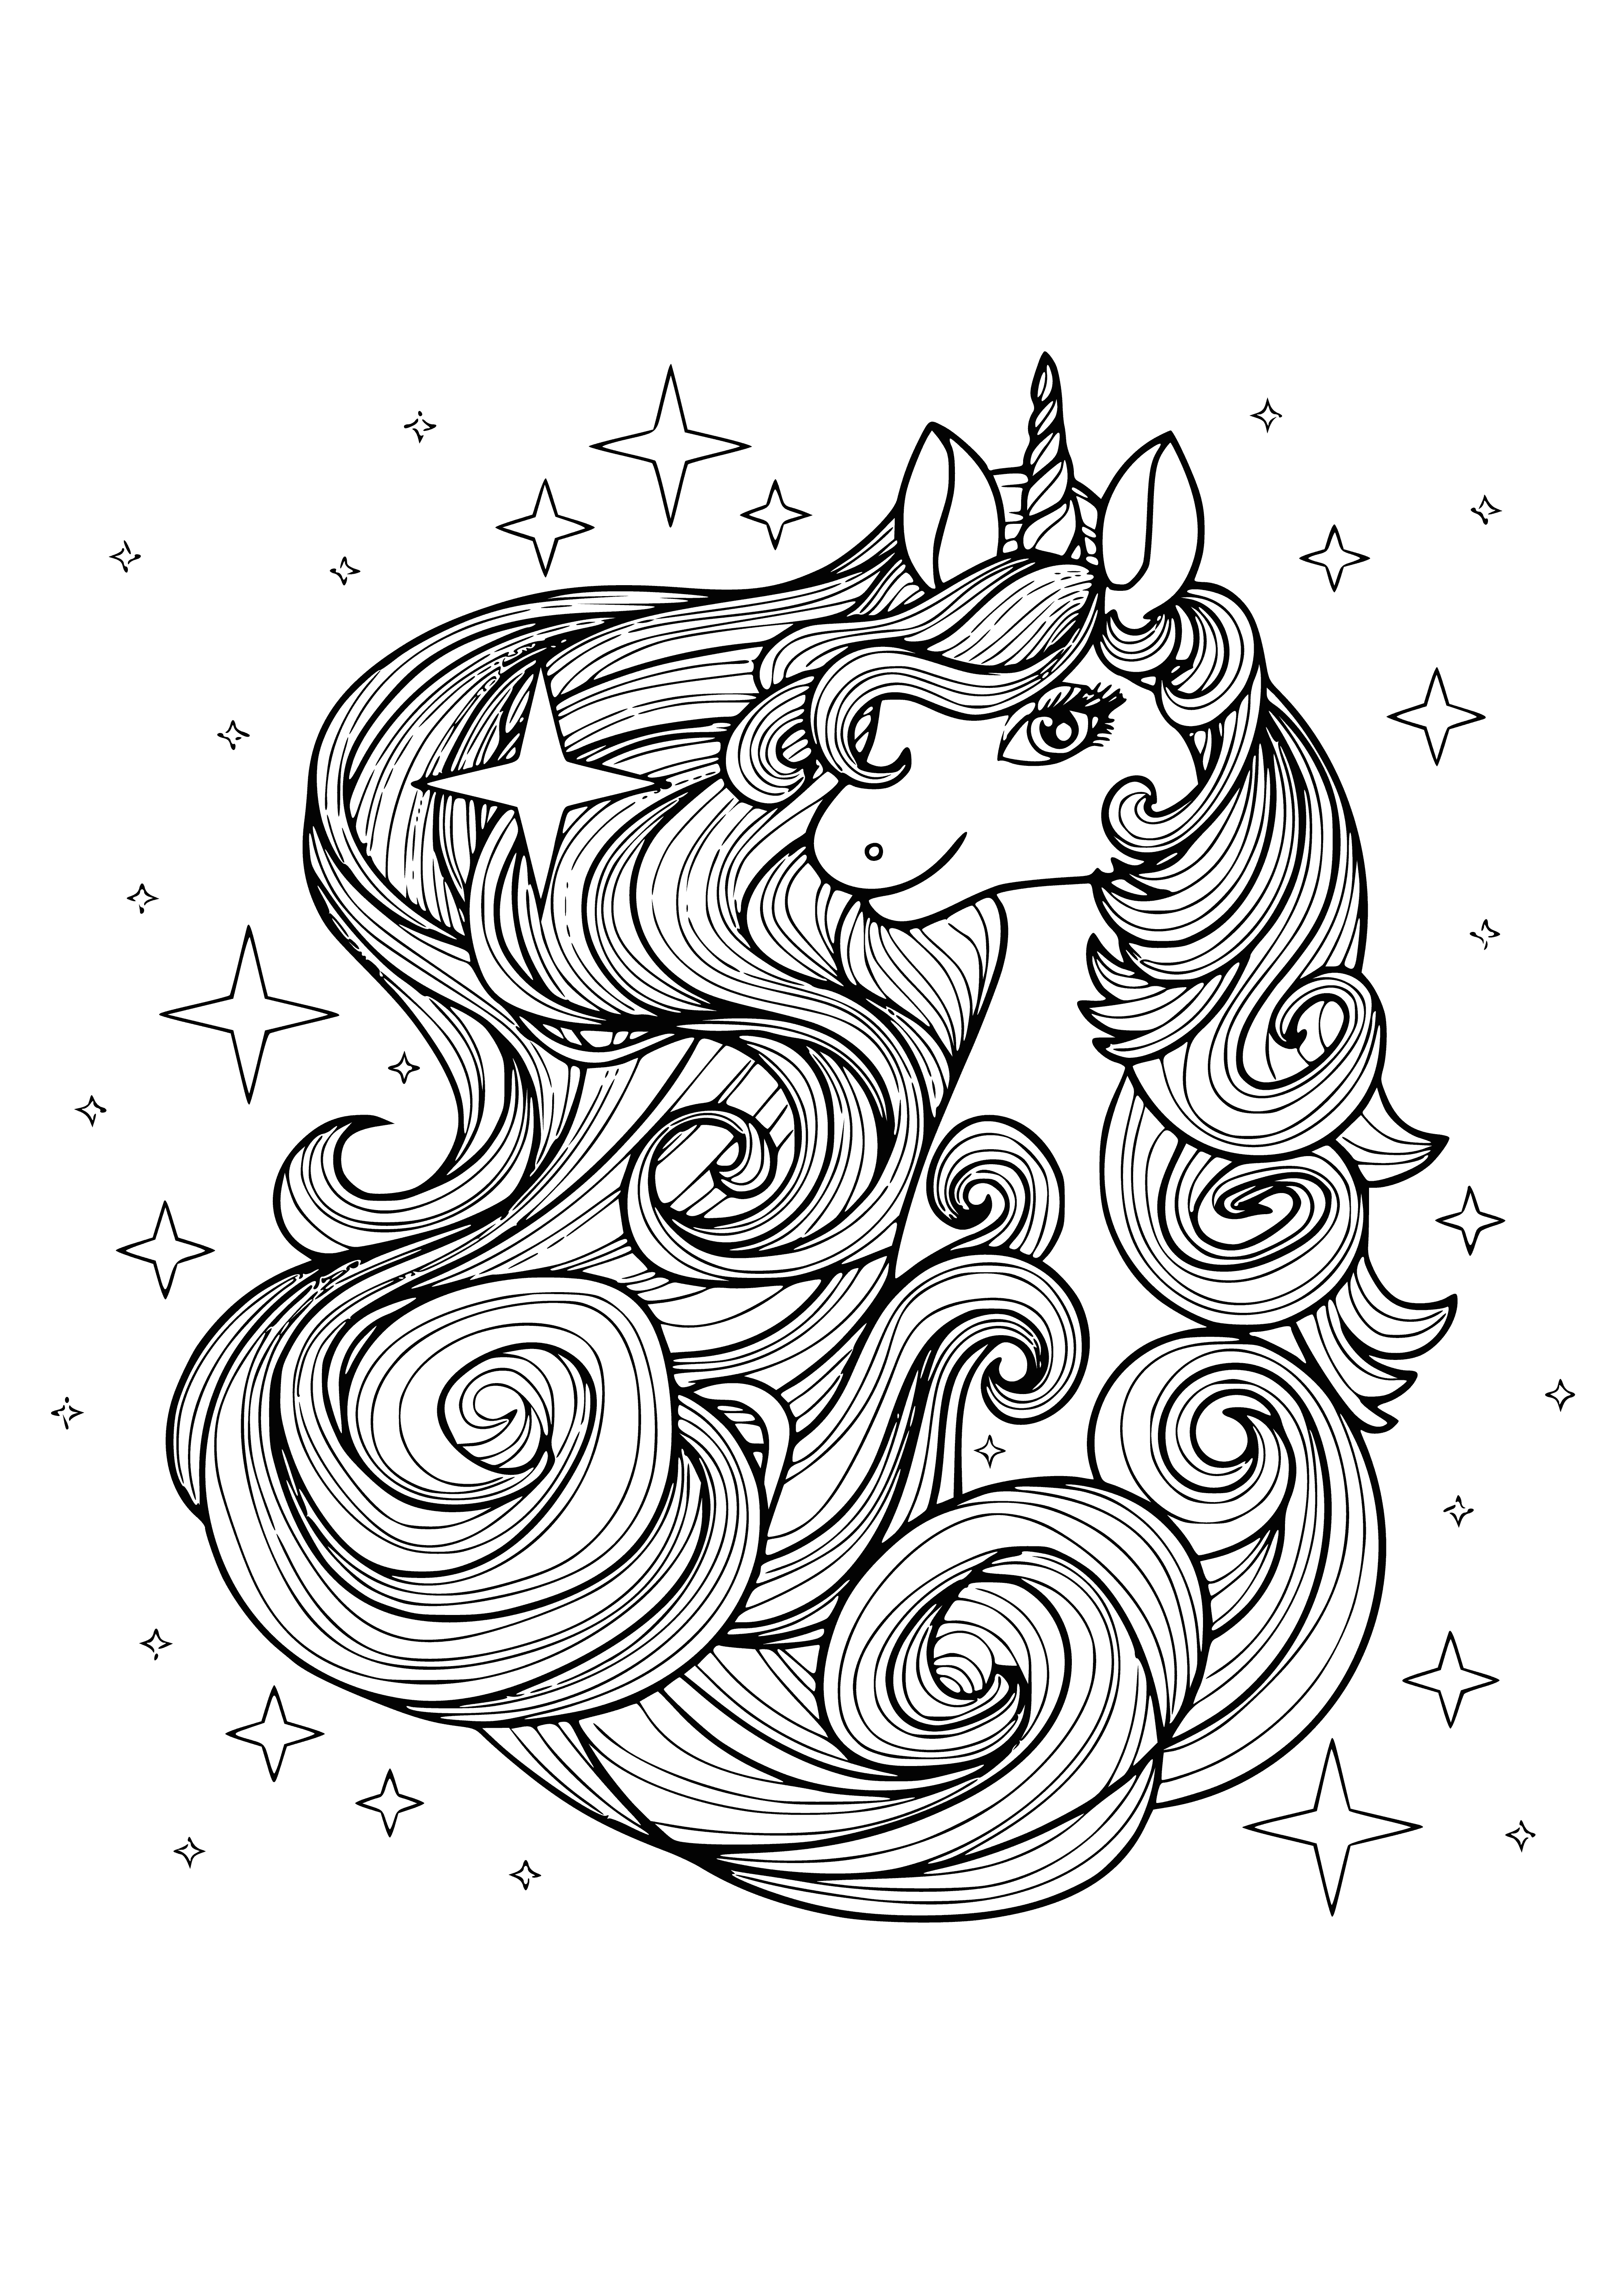 Lovely unicorn coloring page